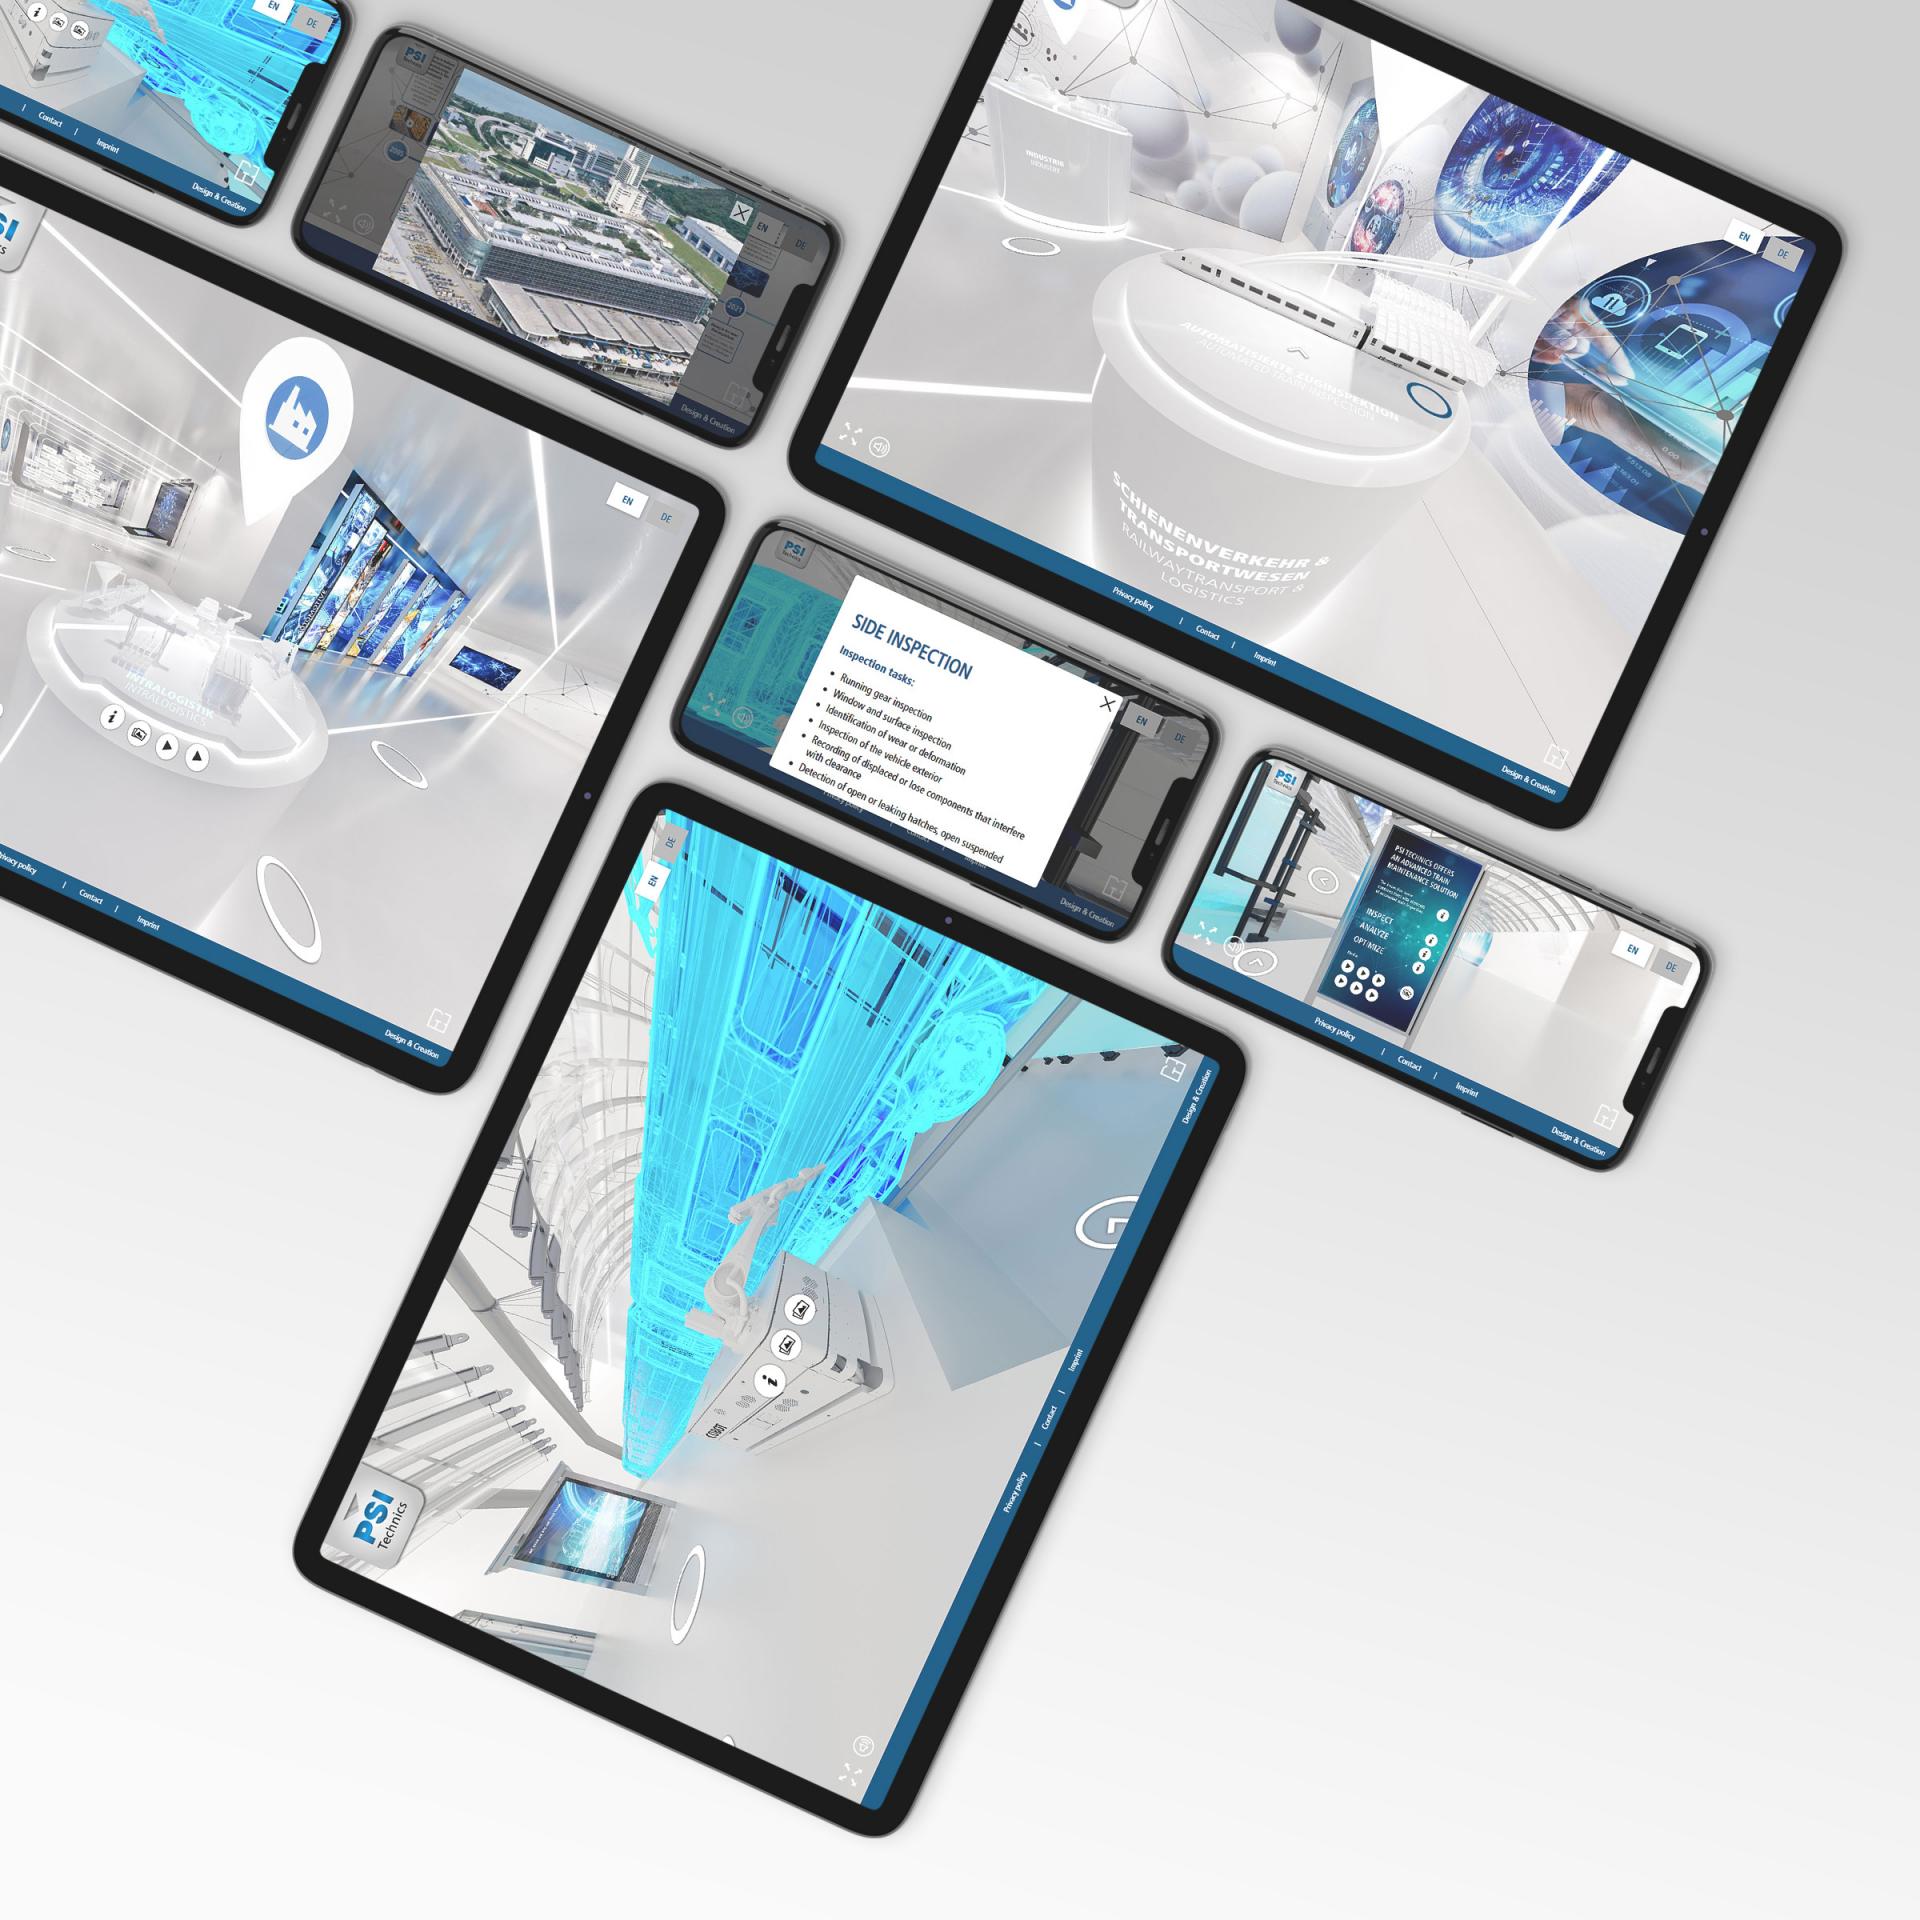 virtual 3D showroom as web application for different devices